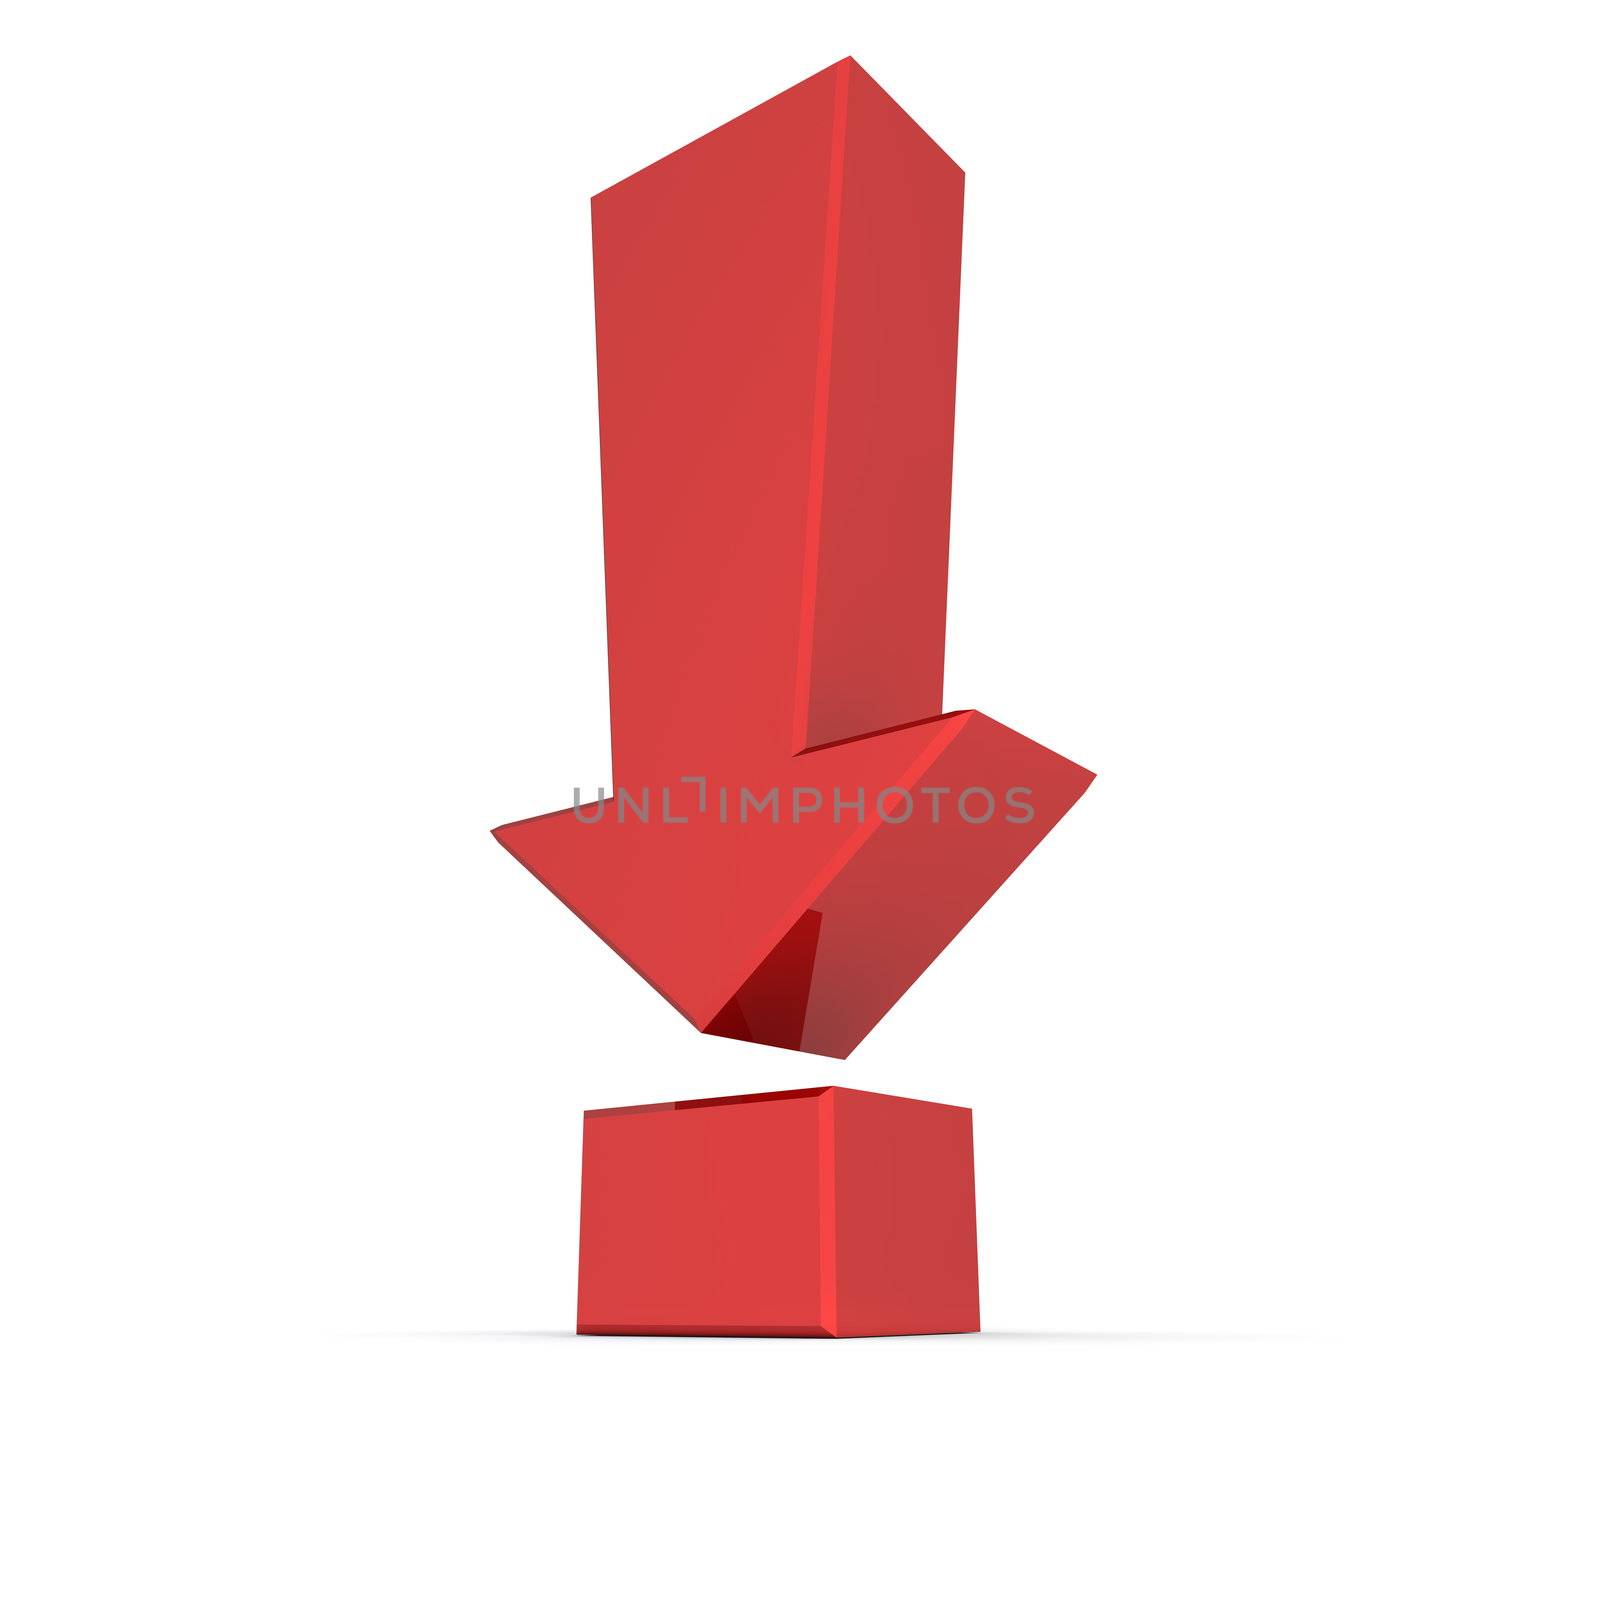 Shiny Red Exclamation Mark Symbol - Arrow Down by PixBox